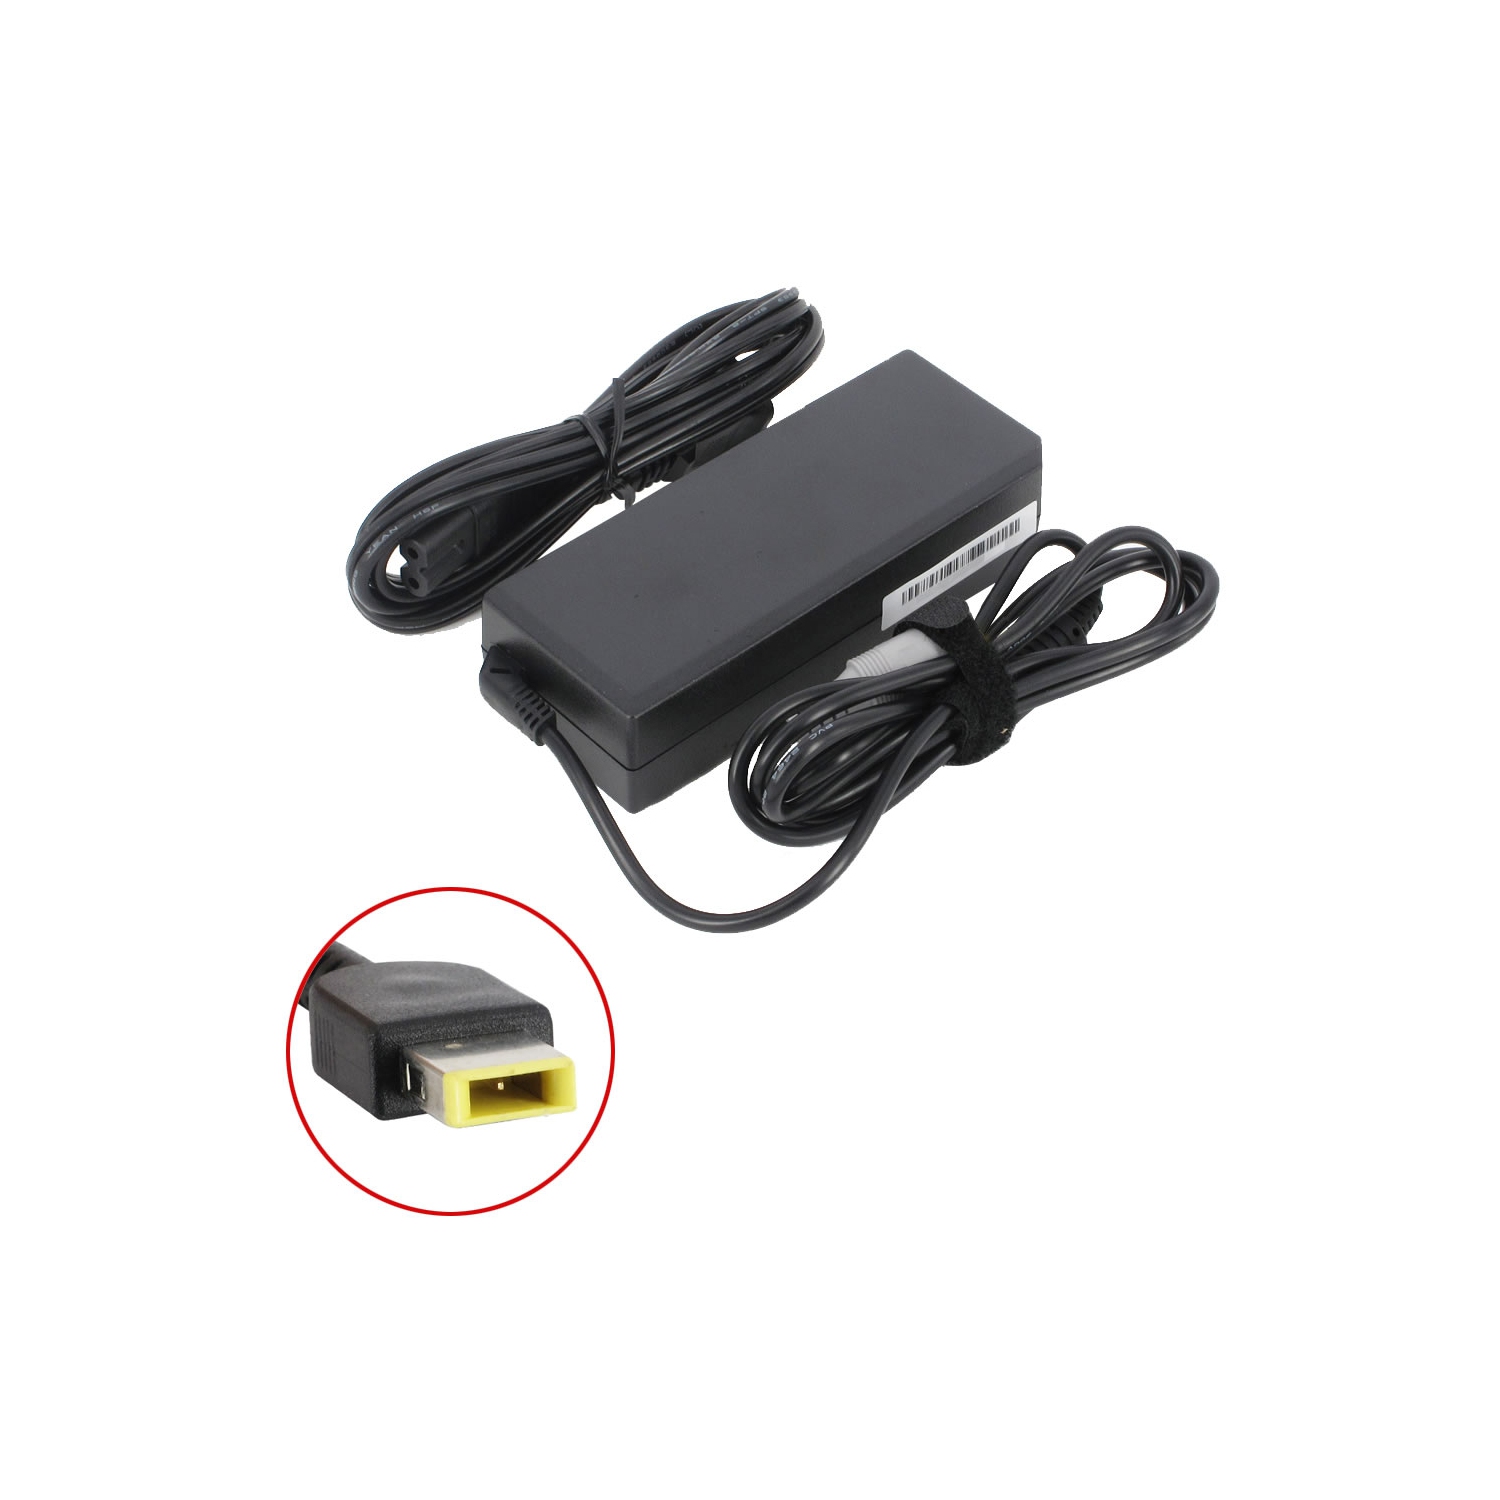 Brand New Laptop AC Adapter for Lenovo IdeaPad 500-15ISK 80NT002UUS, ADP-65XB A, 0B47481, 45N0293, 45N0482, PA-1650-37LF